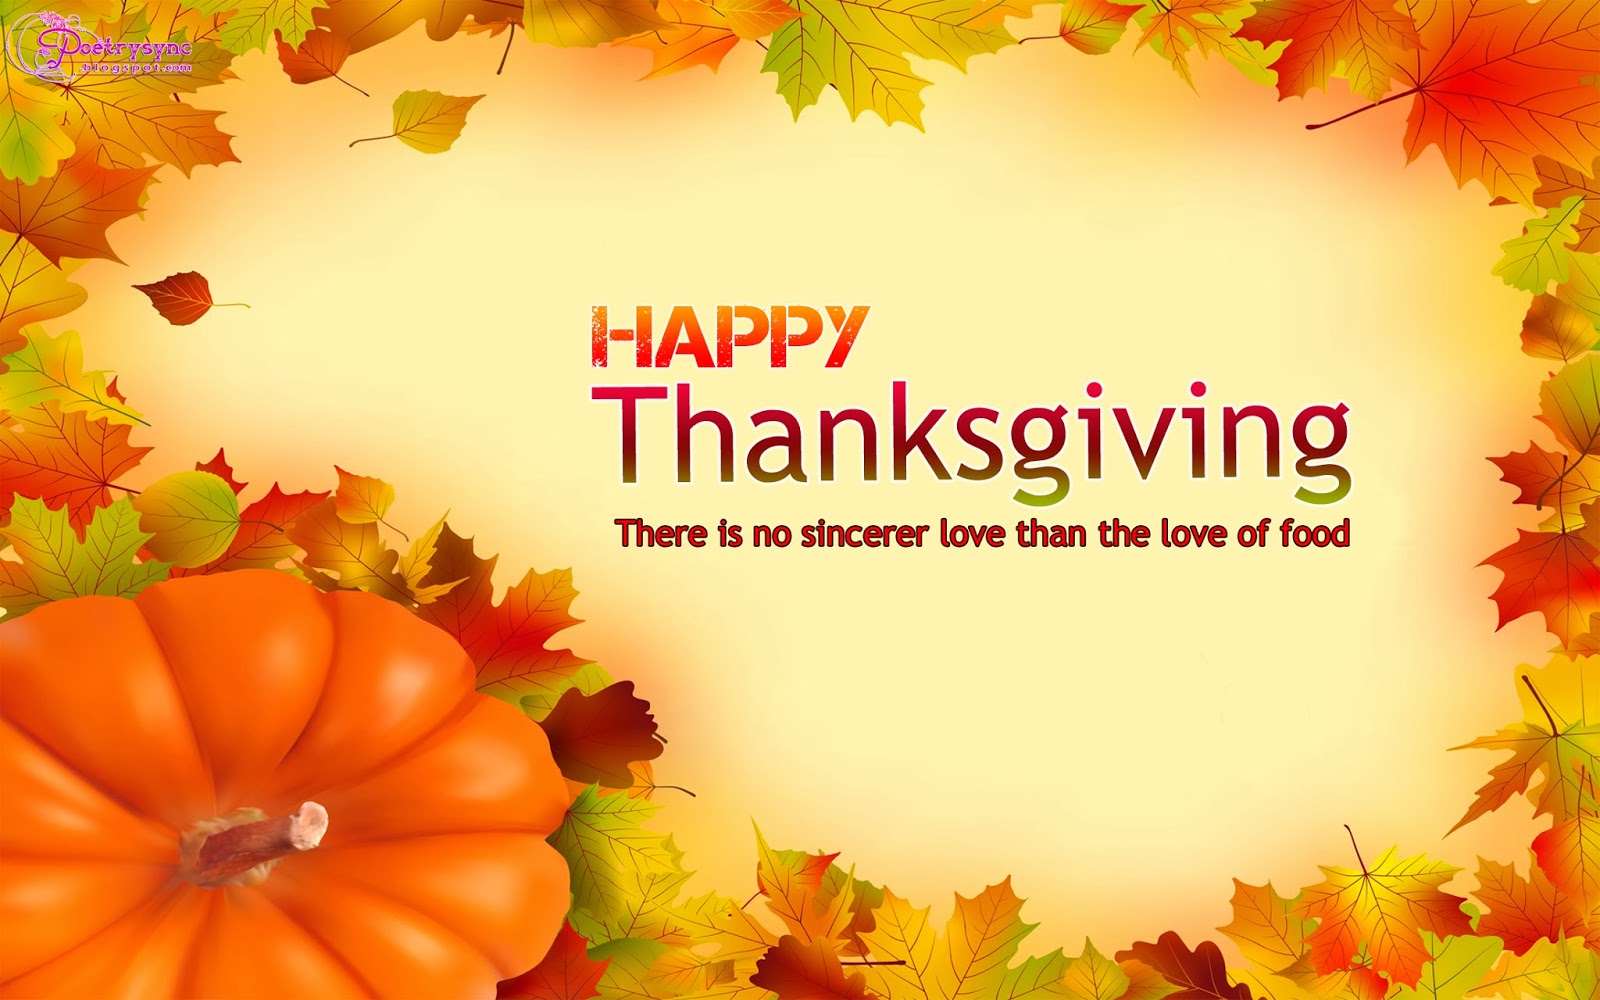 Free Happy Thanksgiving Day Quotes Wishes Sayings Prayers Speech Parade